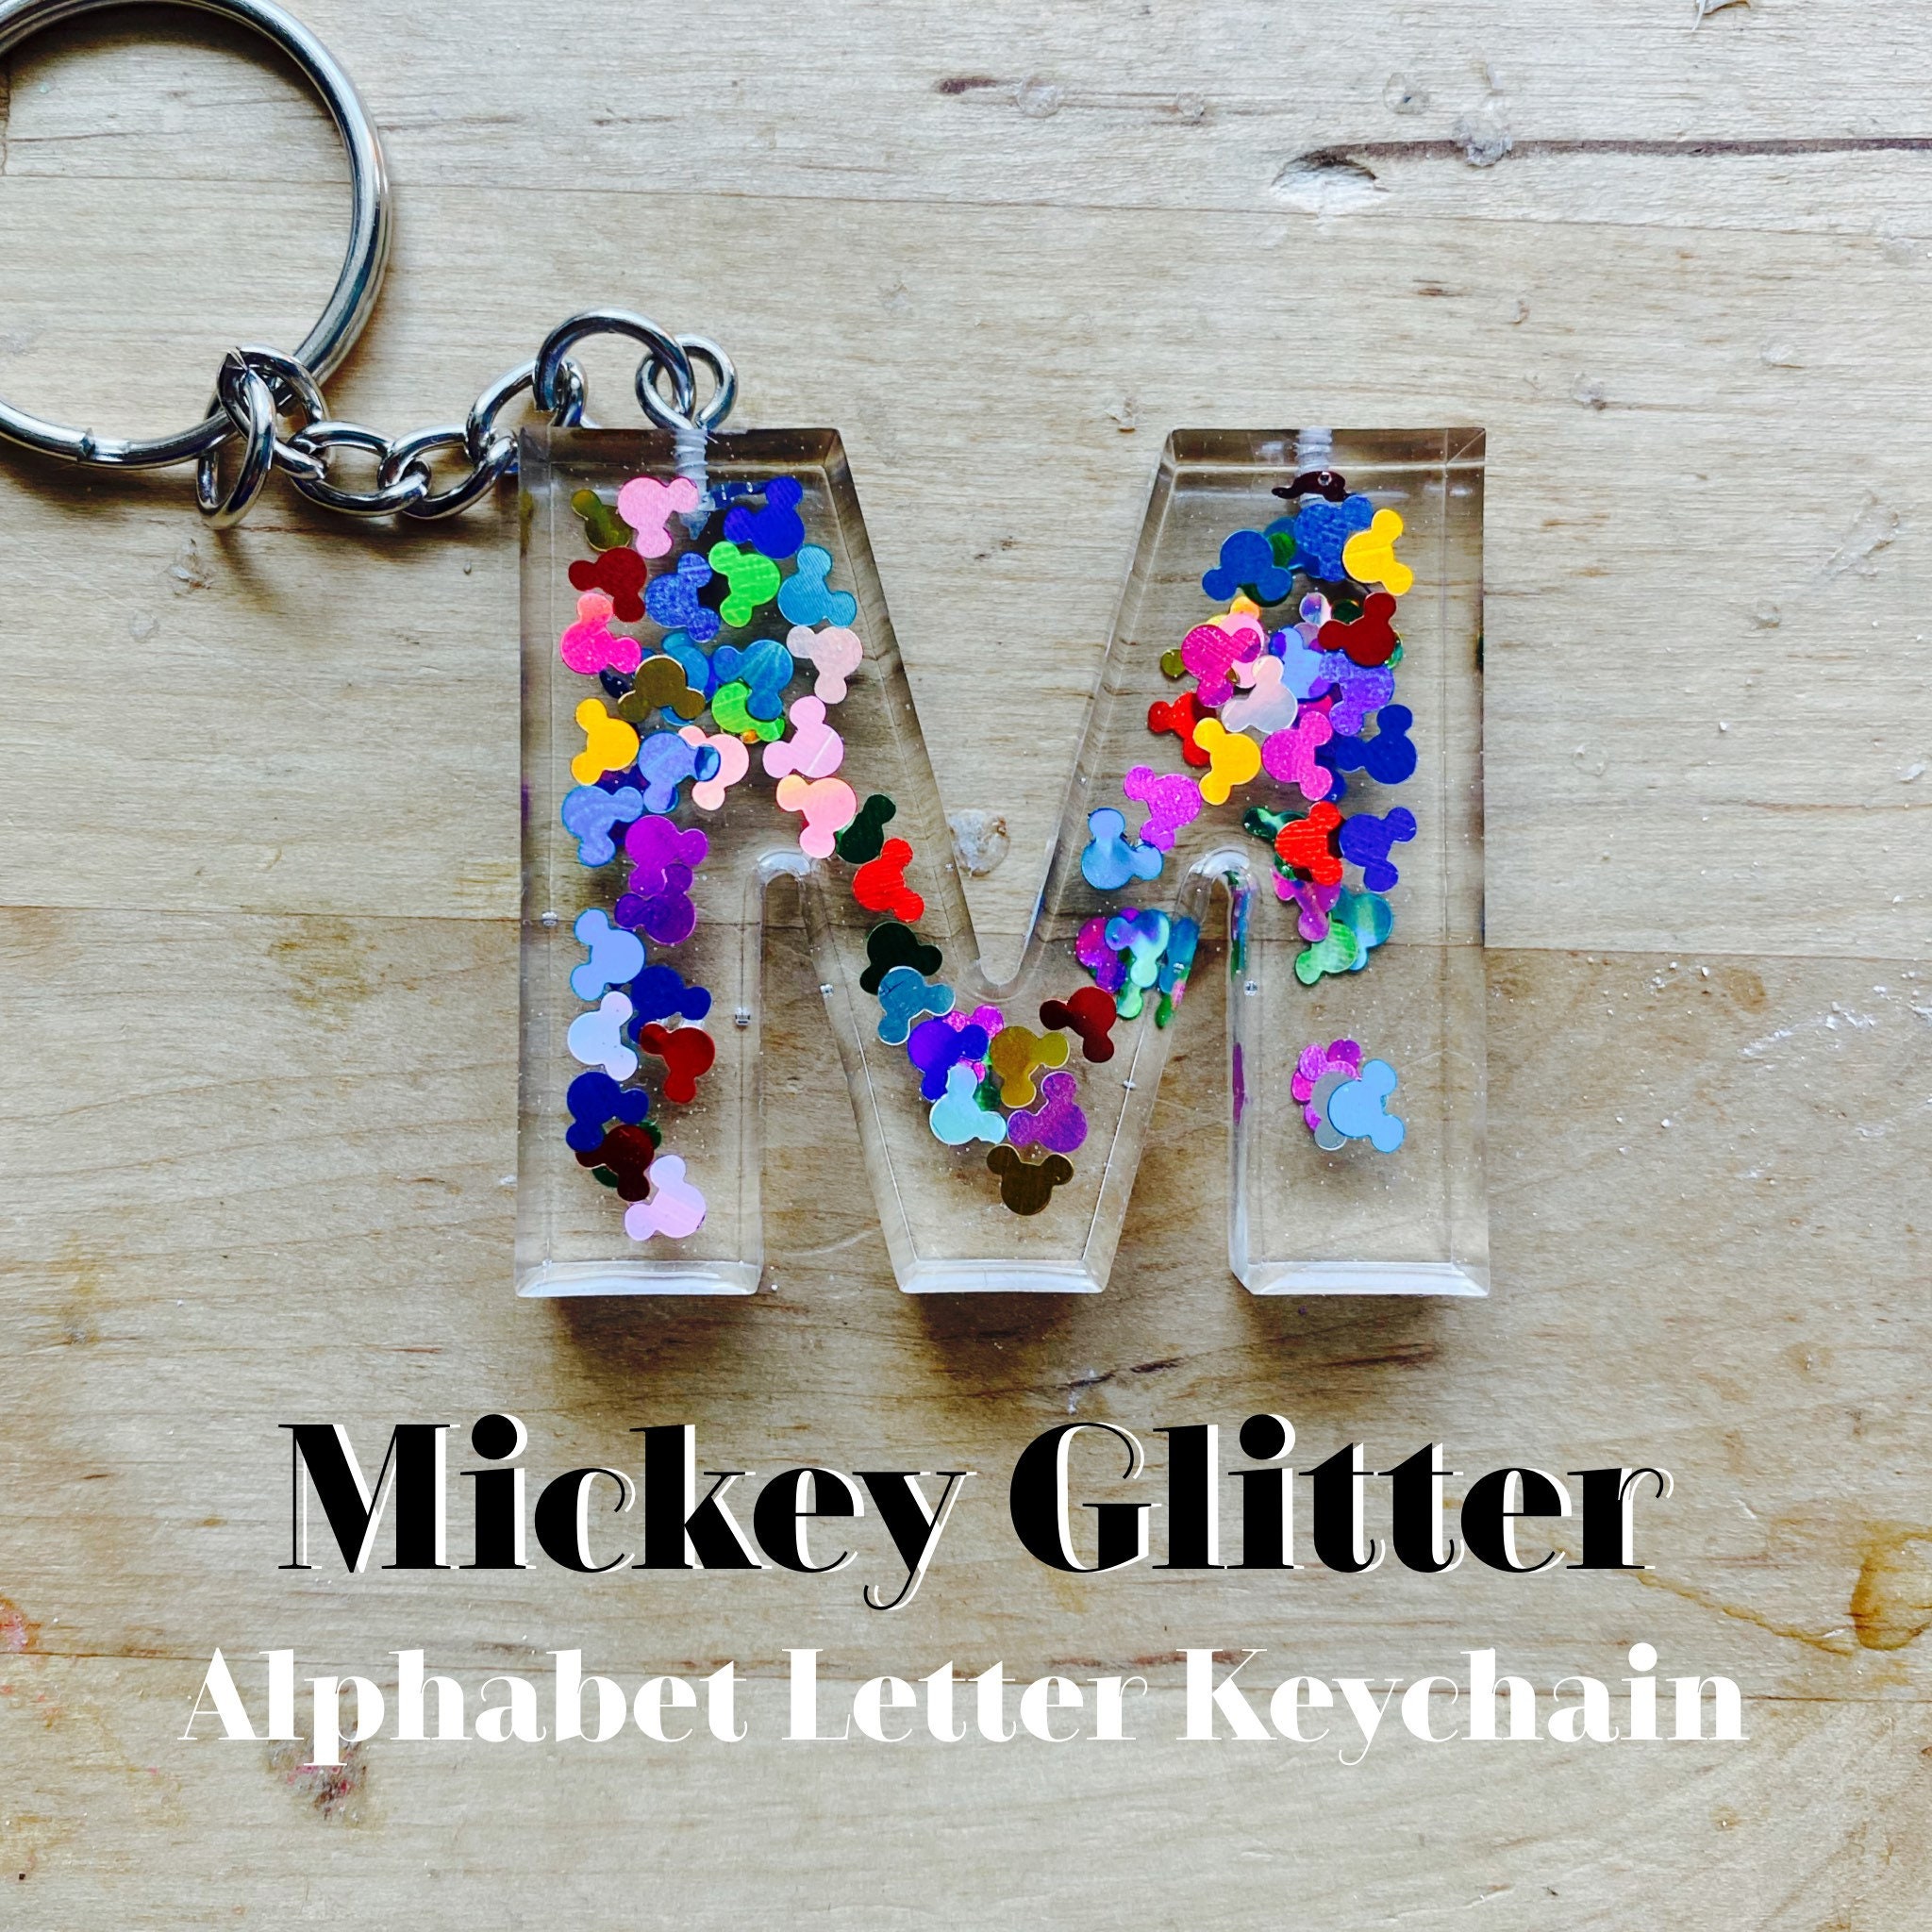 Disney Keychain Key Chain Letter N Initial Alphabet leather metal Mickey  Mouse